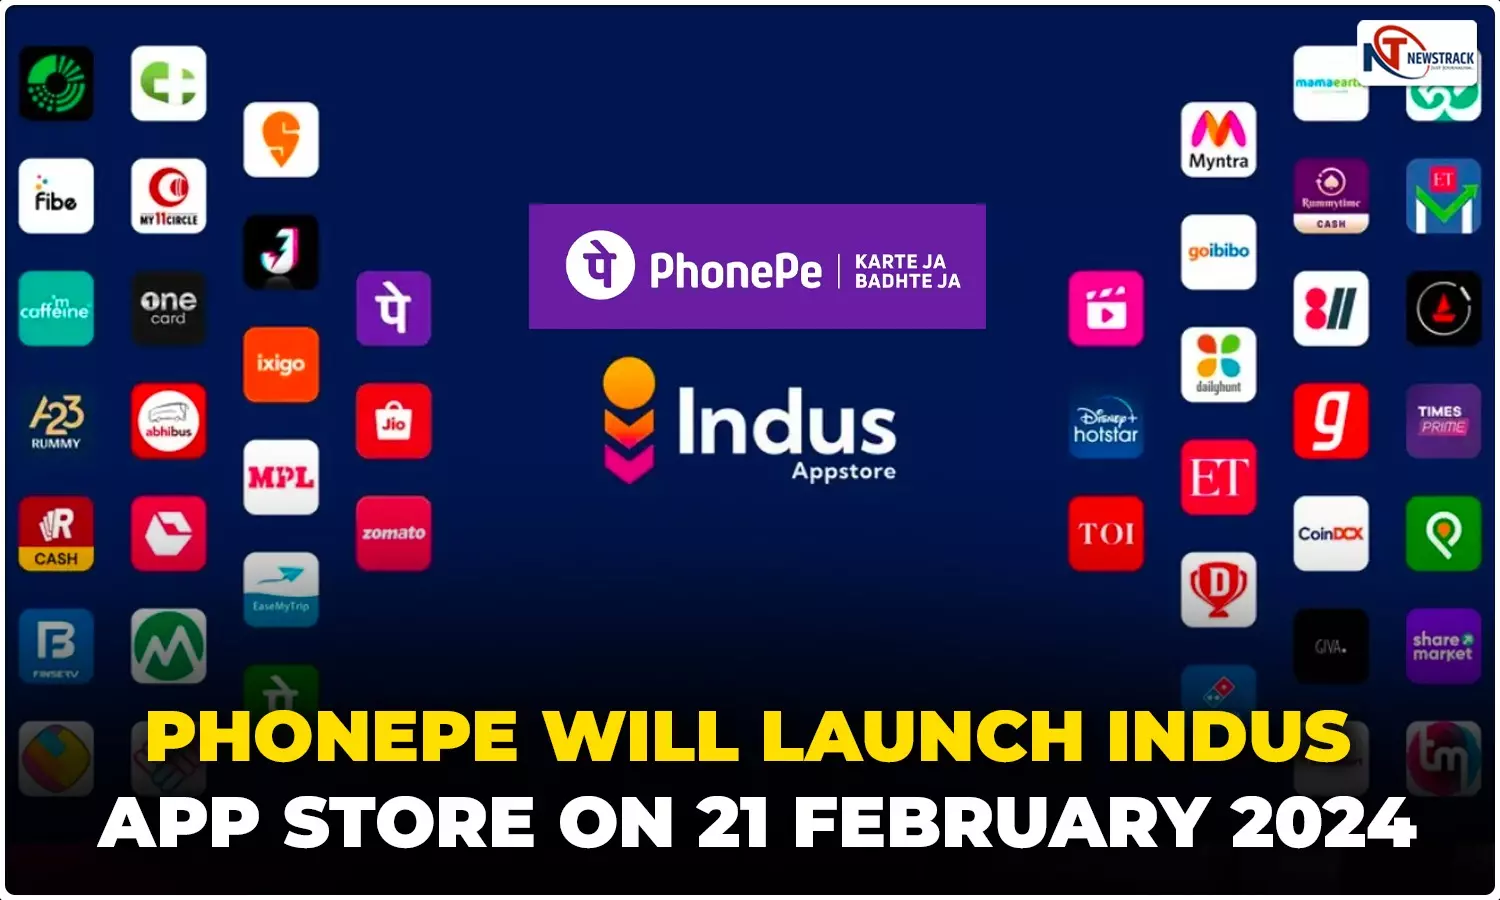 PhonePe Indus App Store on 21 February 2024